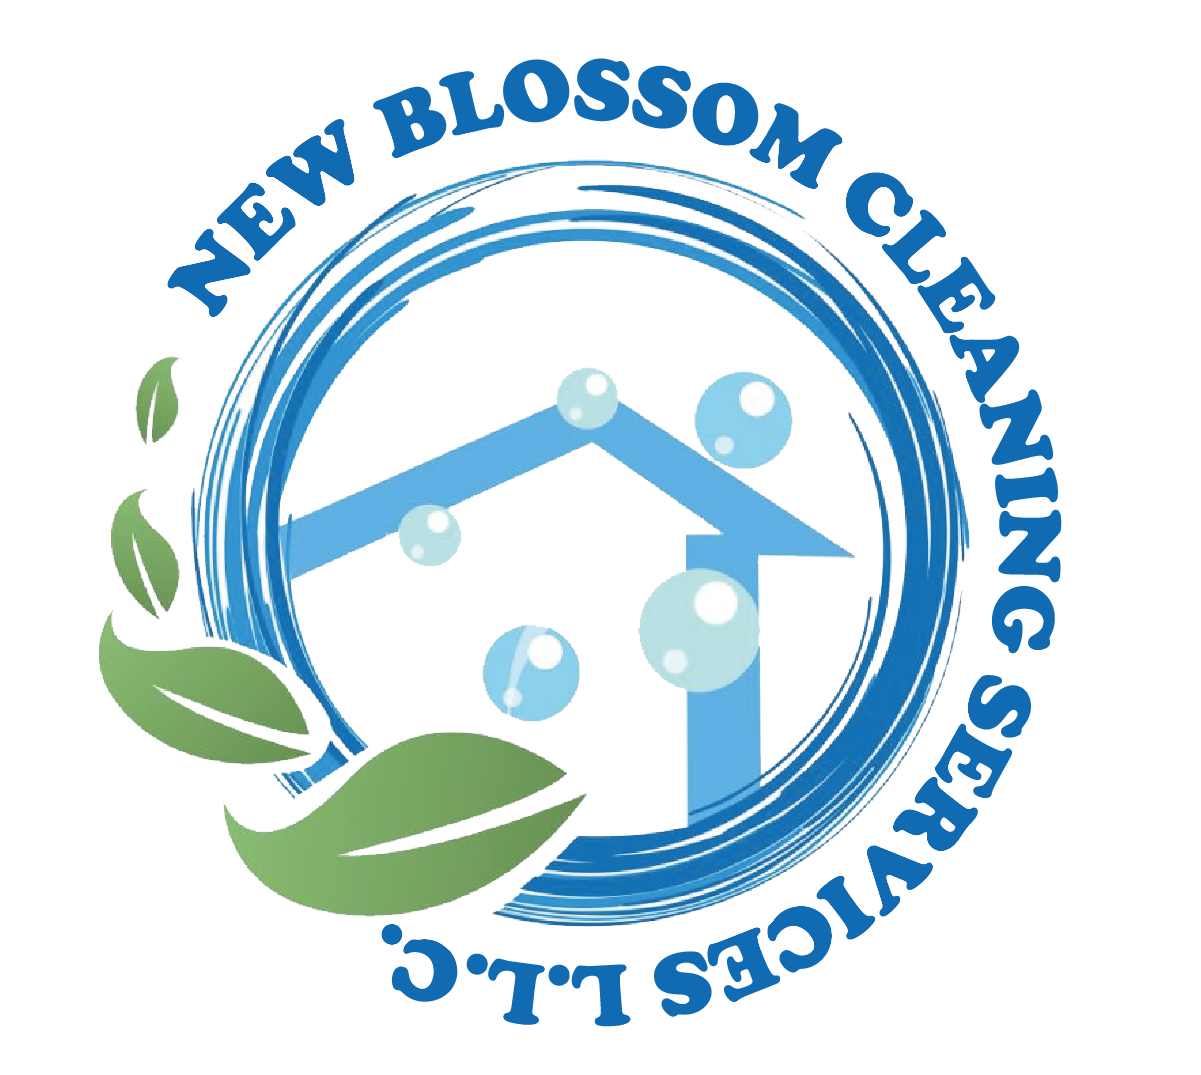 New Blossom Cleaning Services llc